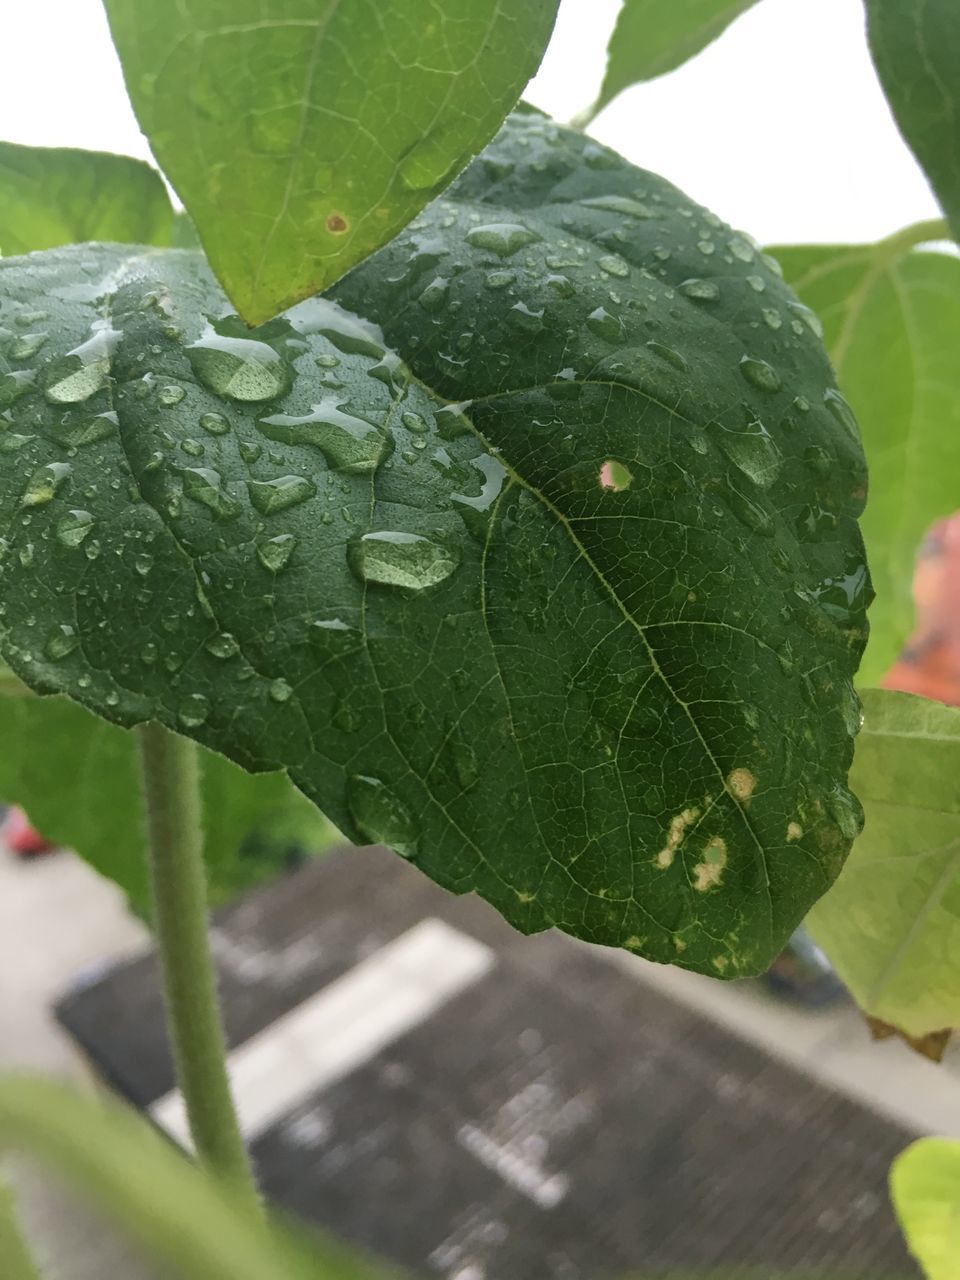 CLOSE-UP OF WET LEAVES ON PLANT